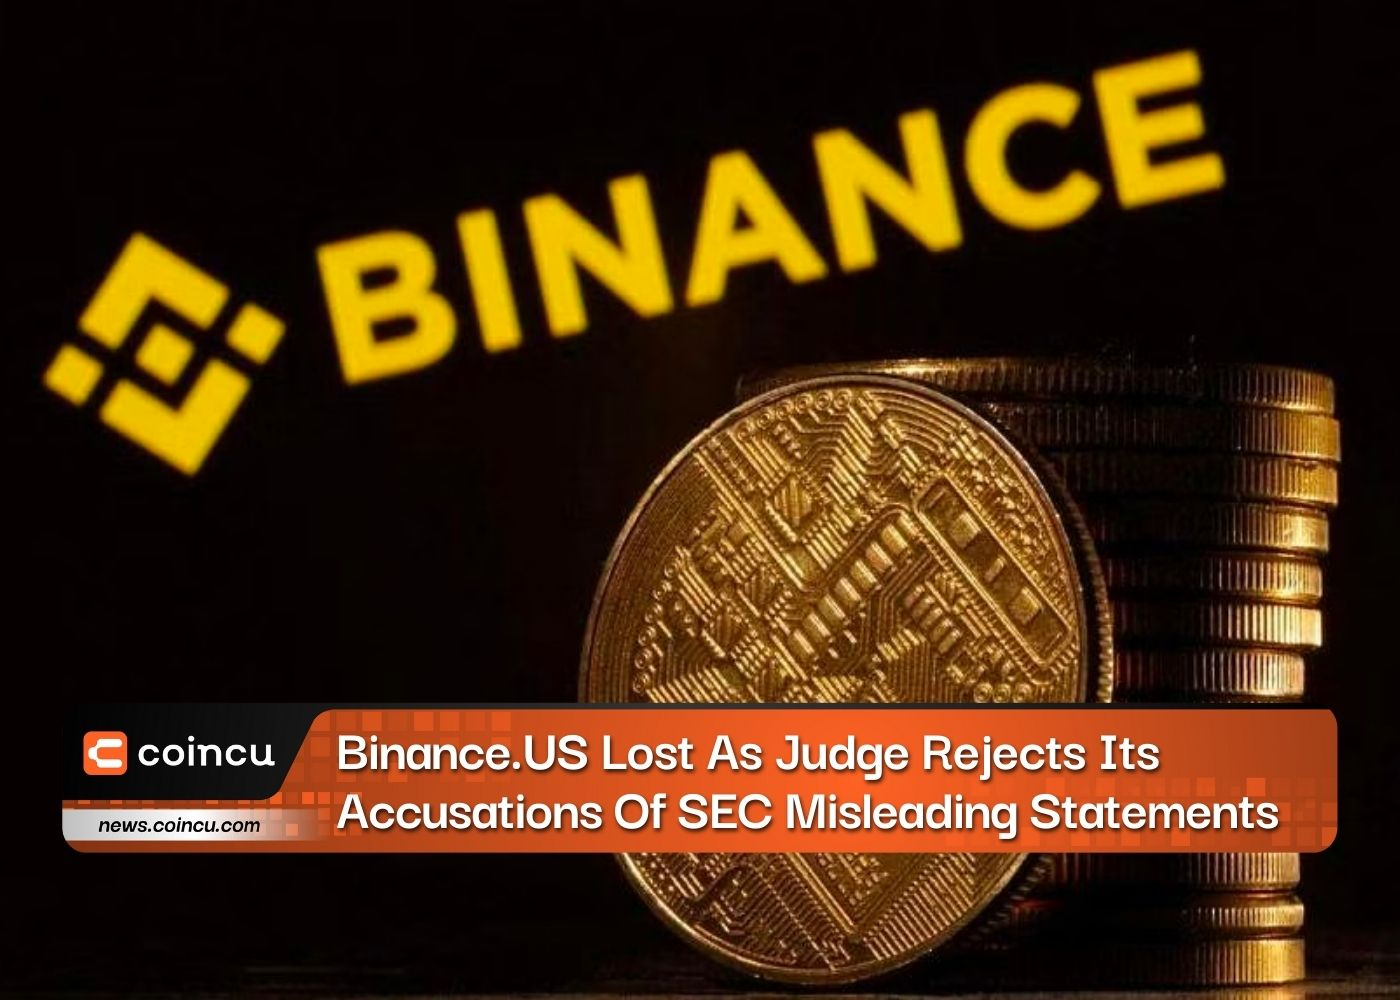 Binance.US Lost As Judge Rejects Its Accusations Of SEC Misleading Statements